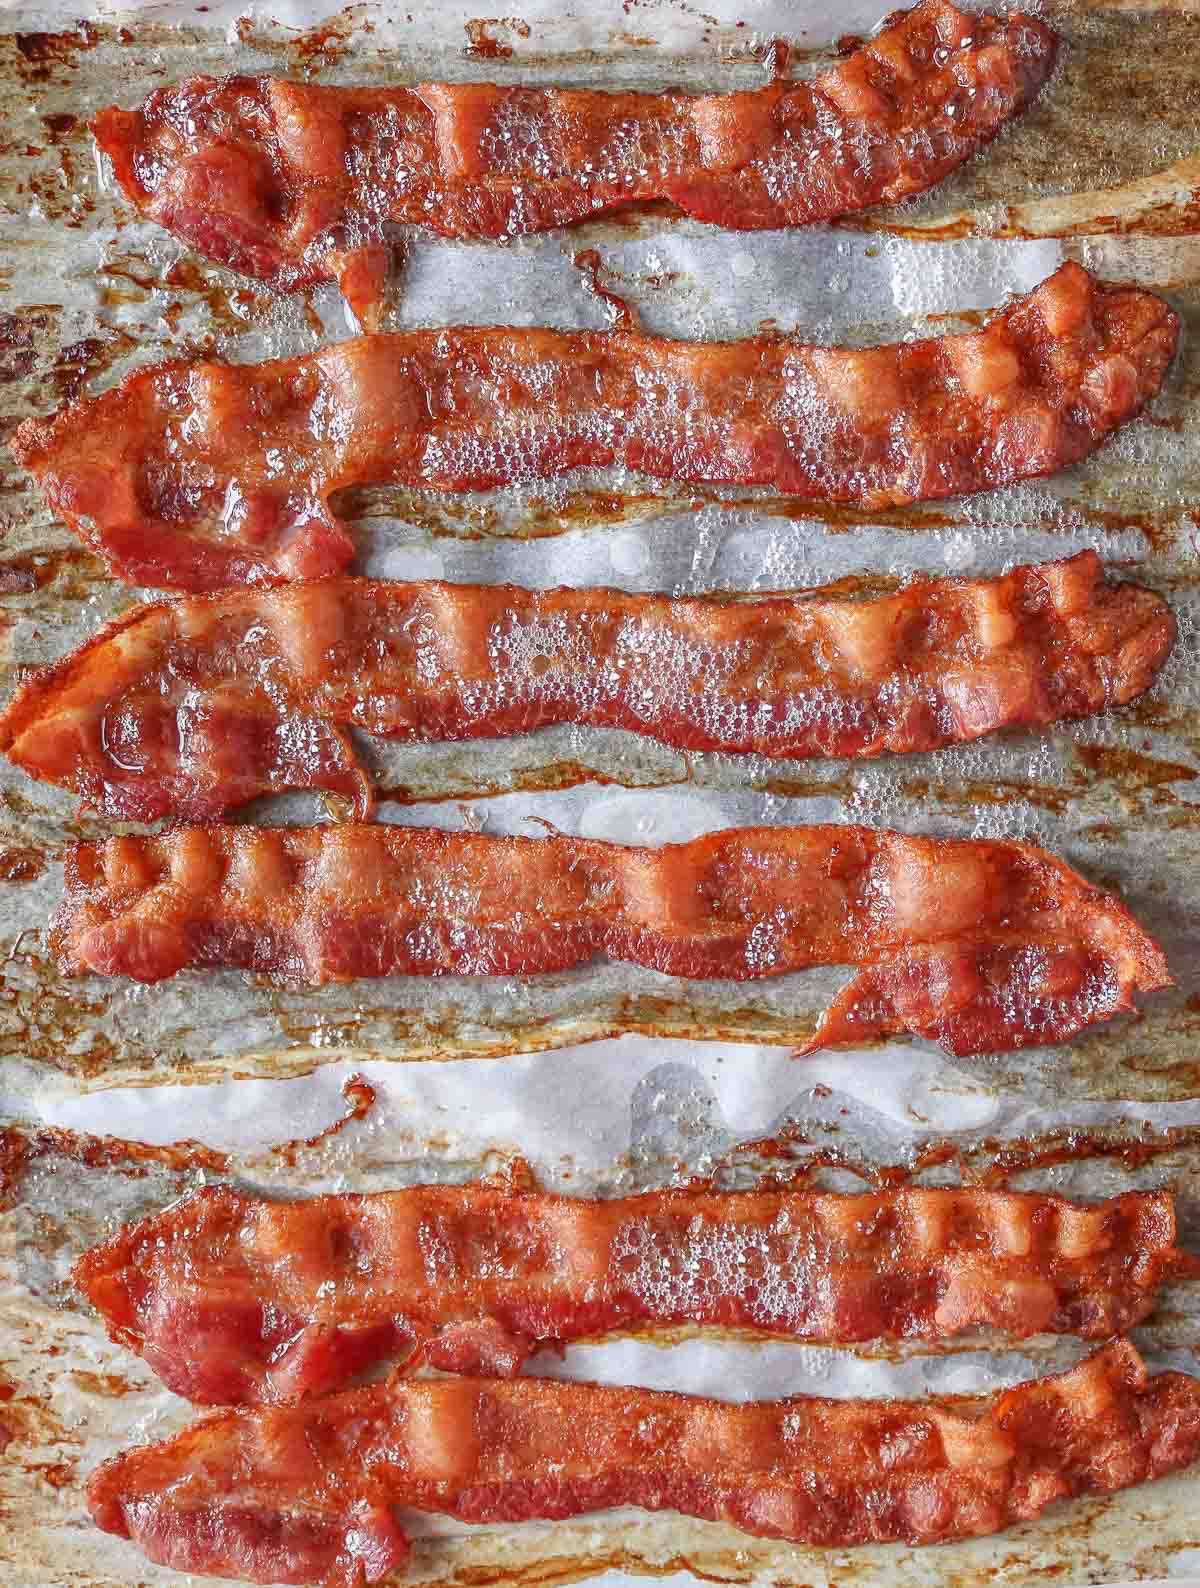 Six slices of crispy baked bacon on a parchment paper-lined sheet pan.